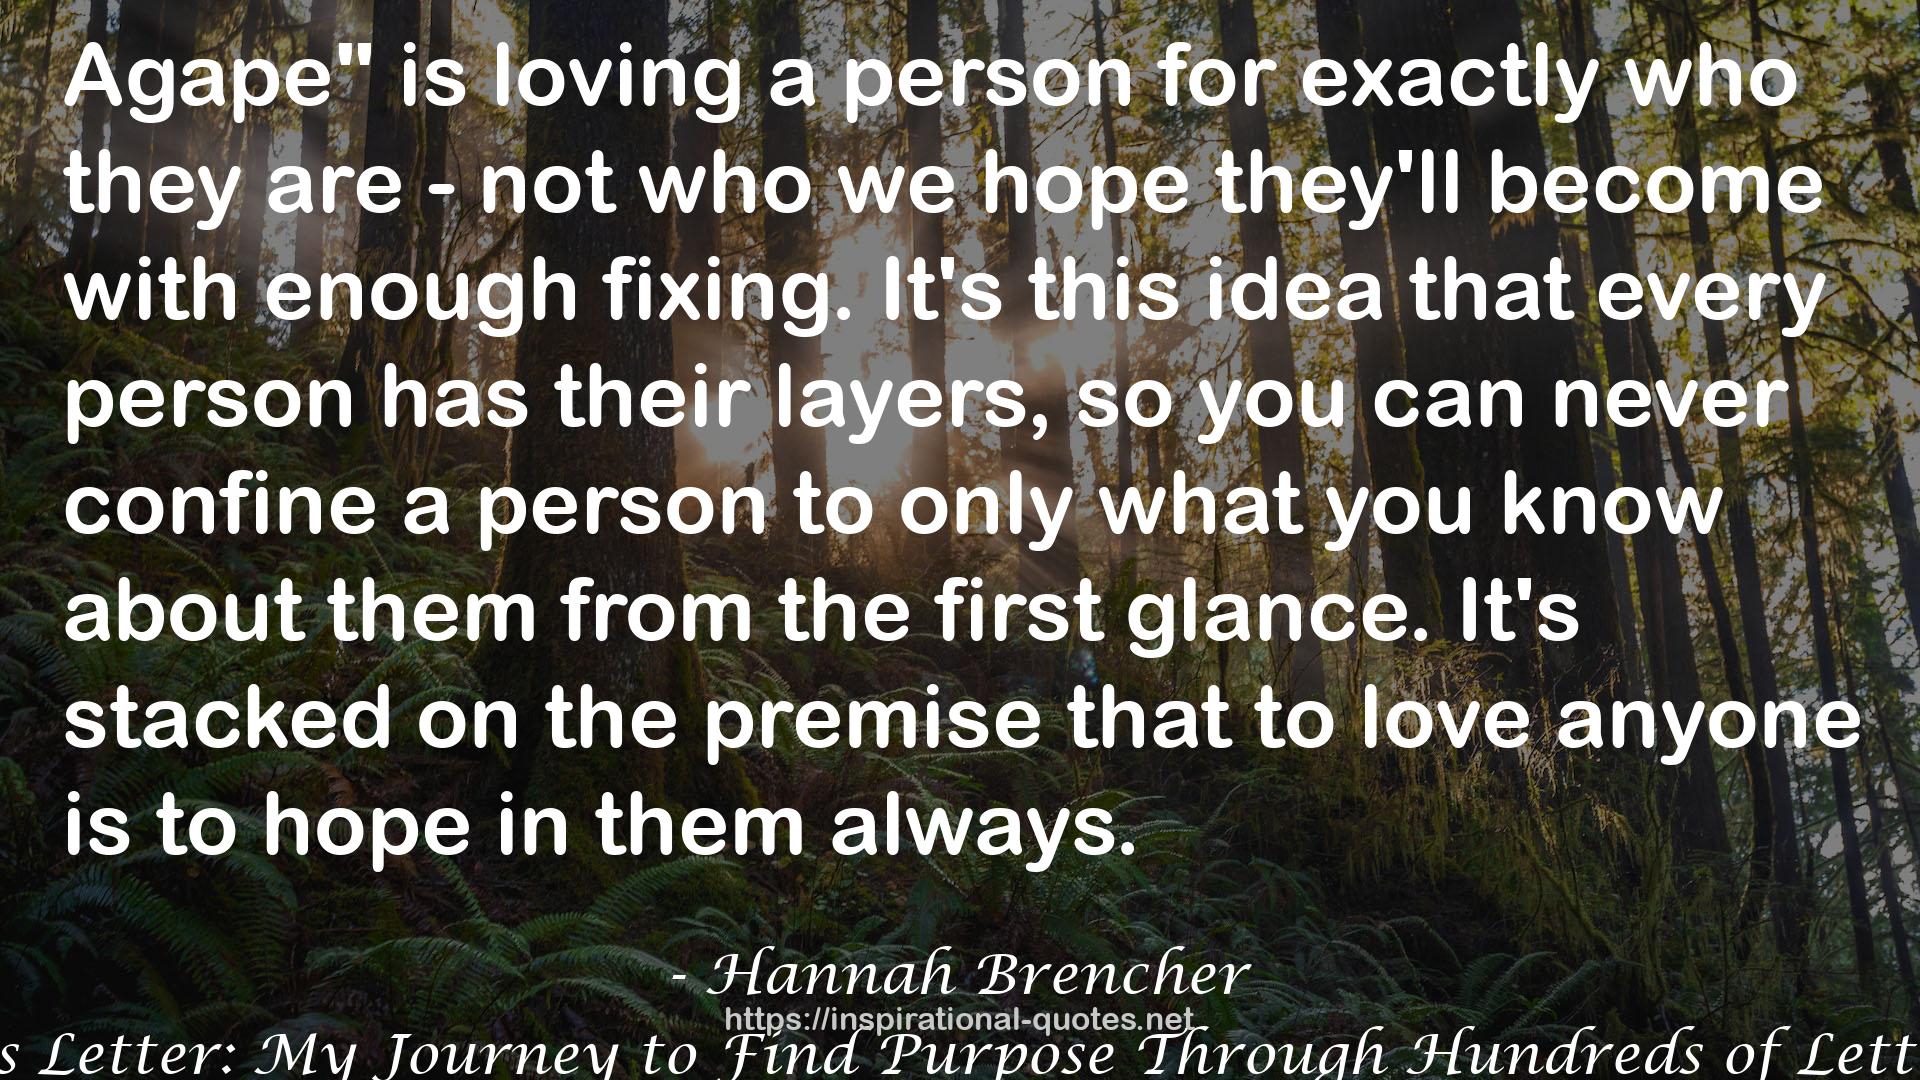 Hannah Brencher QUOTES